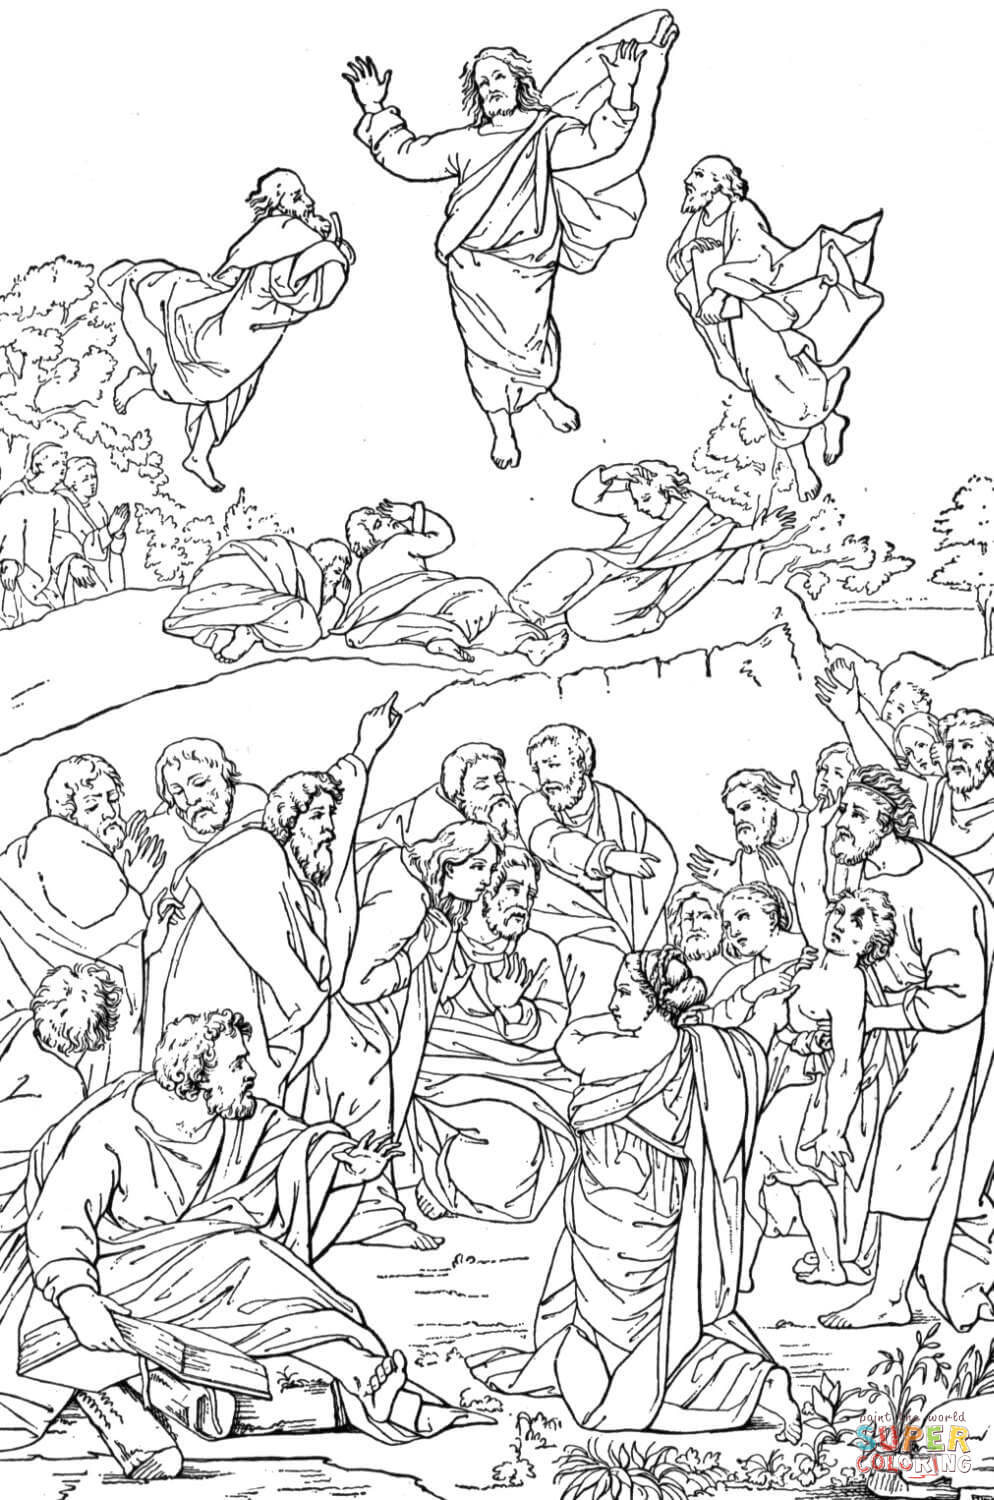 Transfiguration of Christ coloring page | Free Printable Coloring